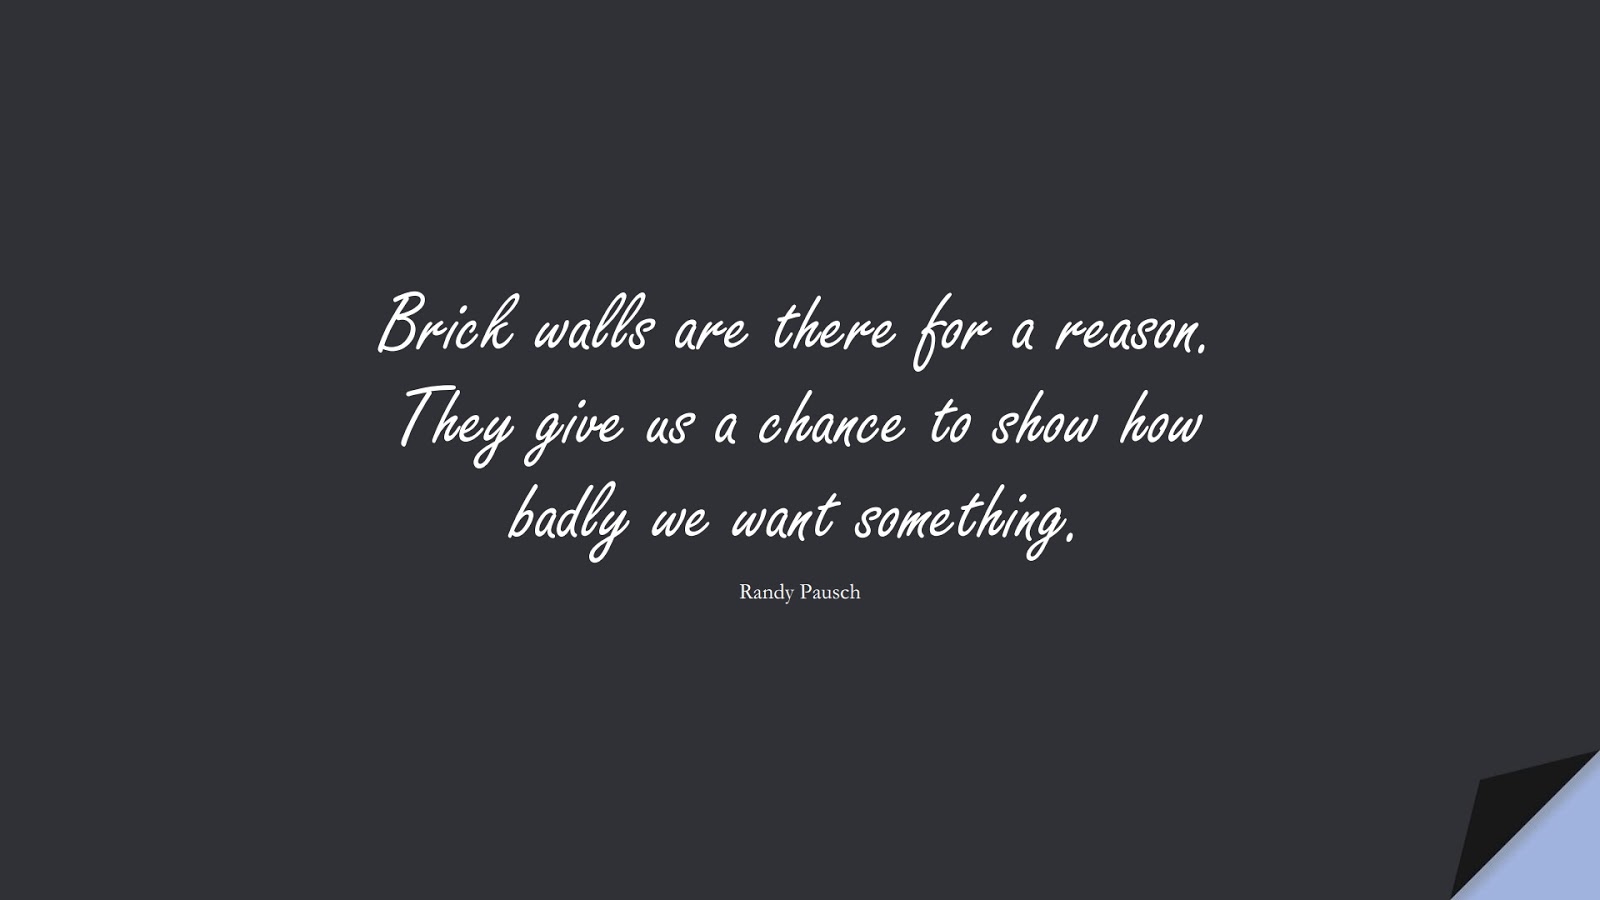 Brick walls are there for a reason. They give us a chance to show how badly we want something. (Randy Pausch);  #NeverGiveUpQuotes